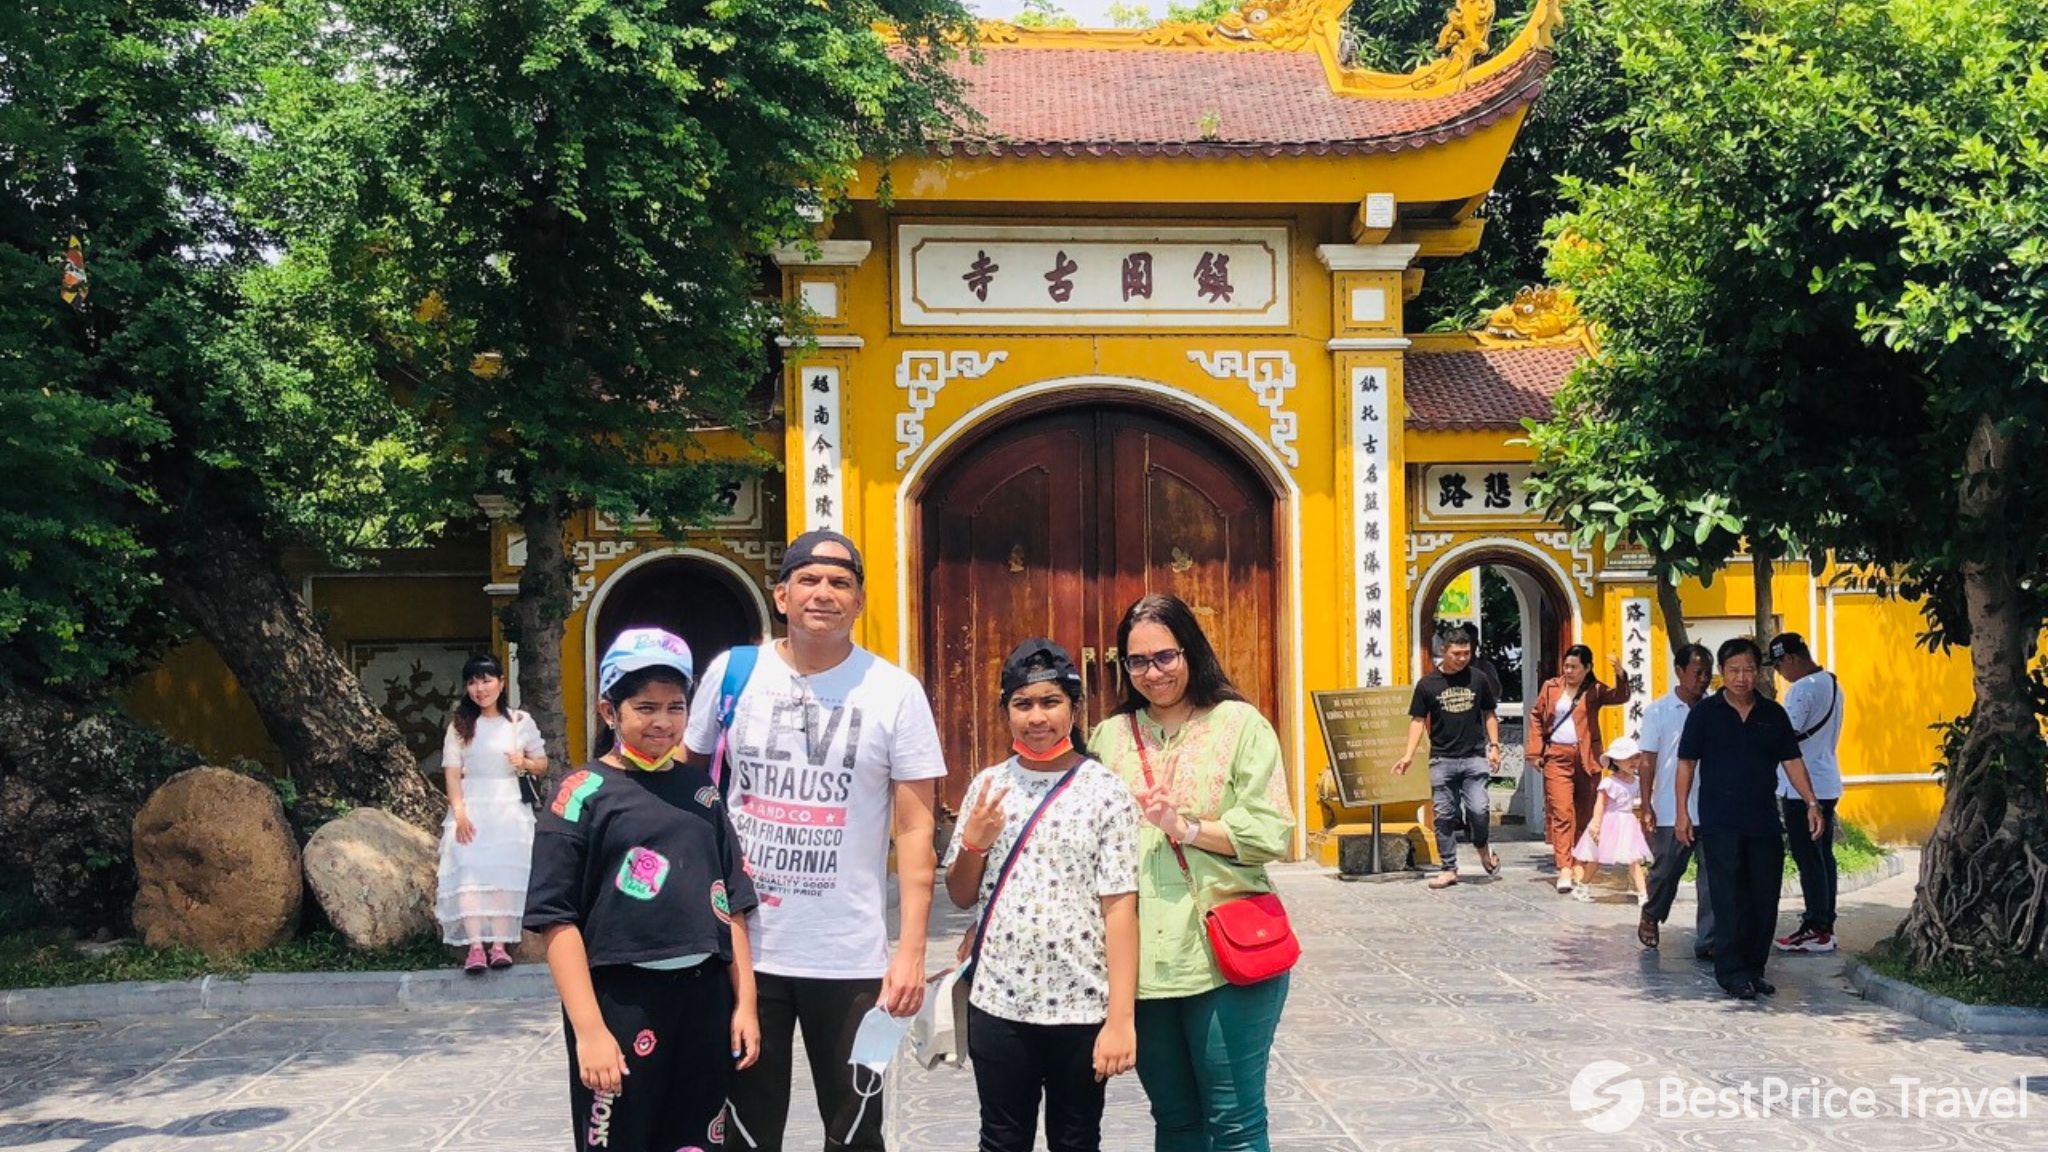 Day 2 Visit Tran Quoc Pagoda The Oldest Pagoda In Hanoi